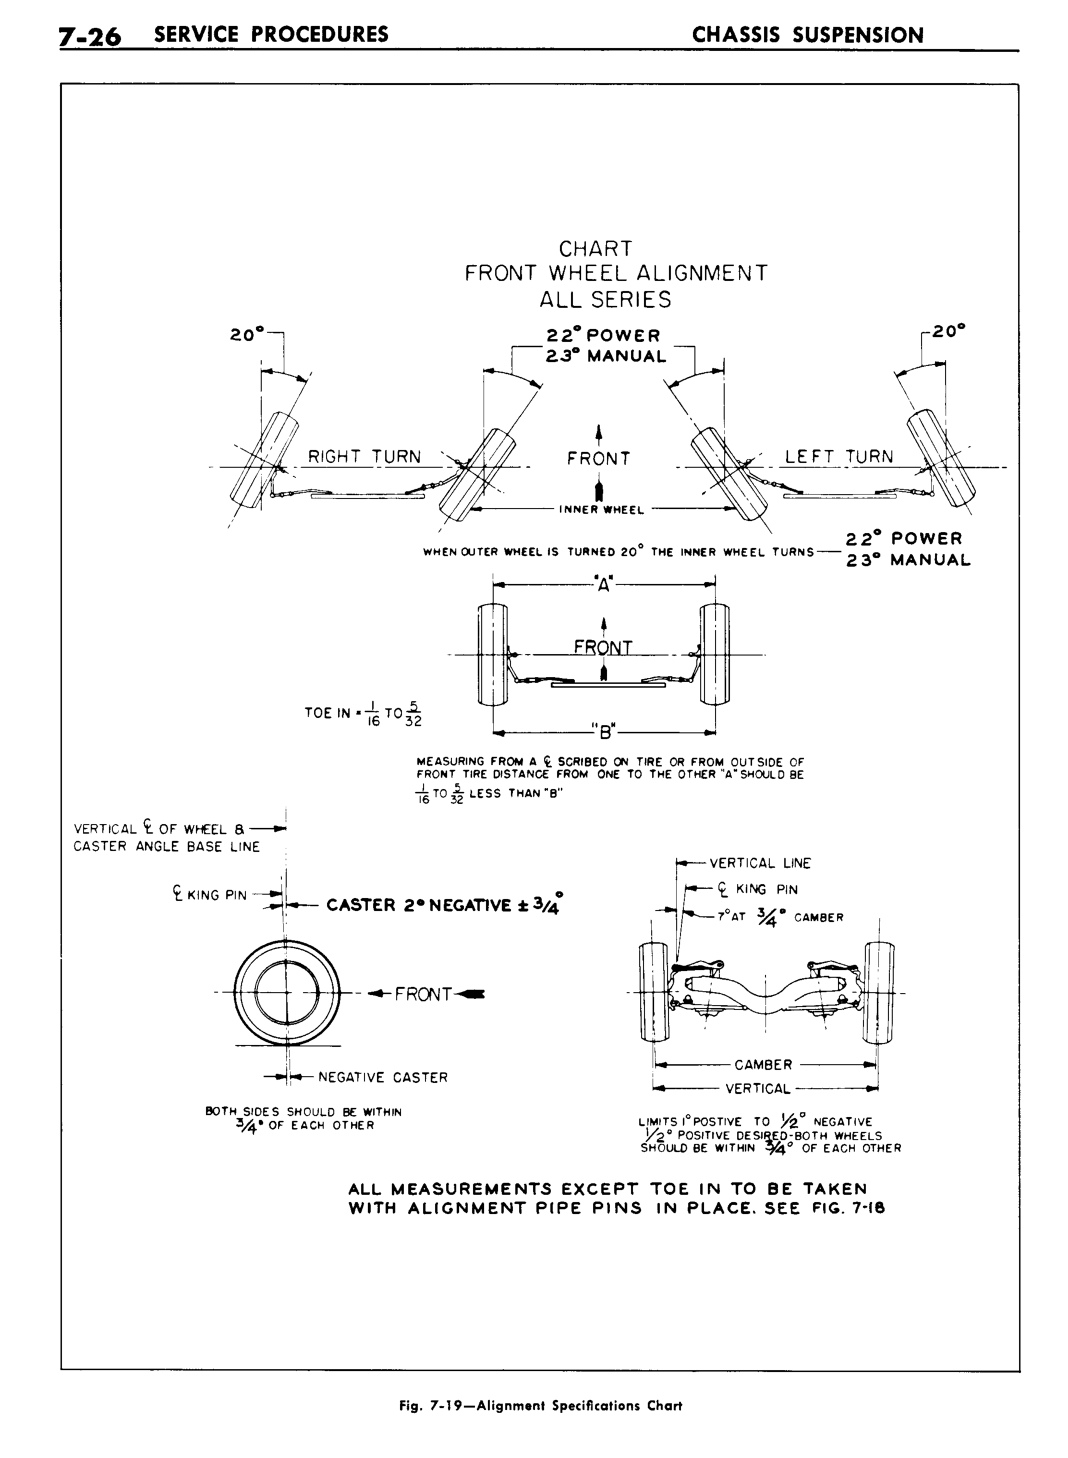 n_08 1960 Buick Shop Manual - Chassis Suspension-026-026.jpg